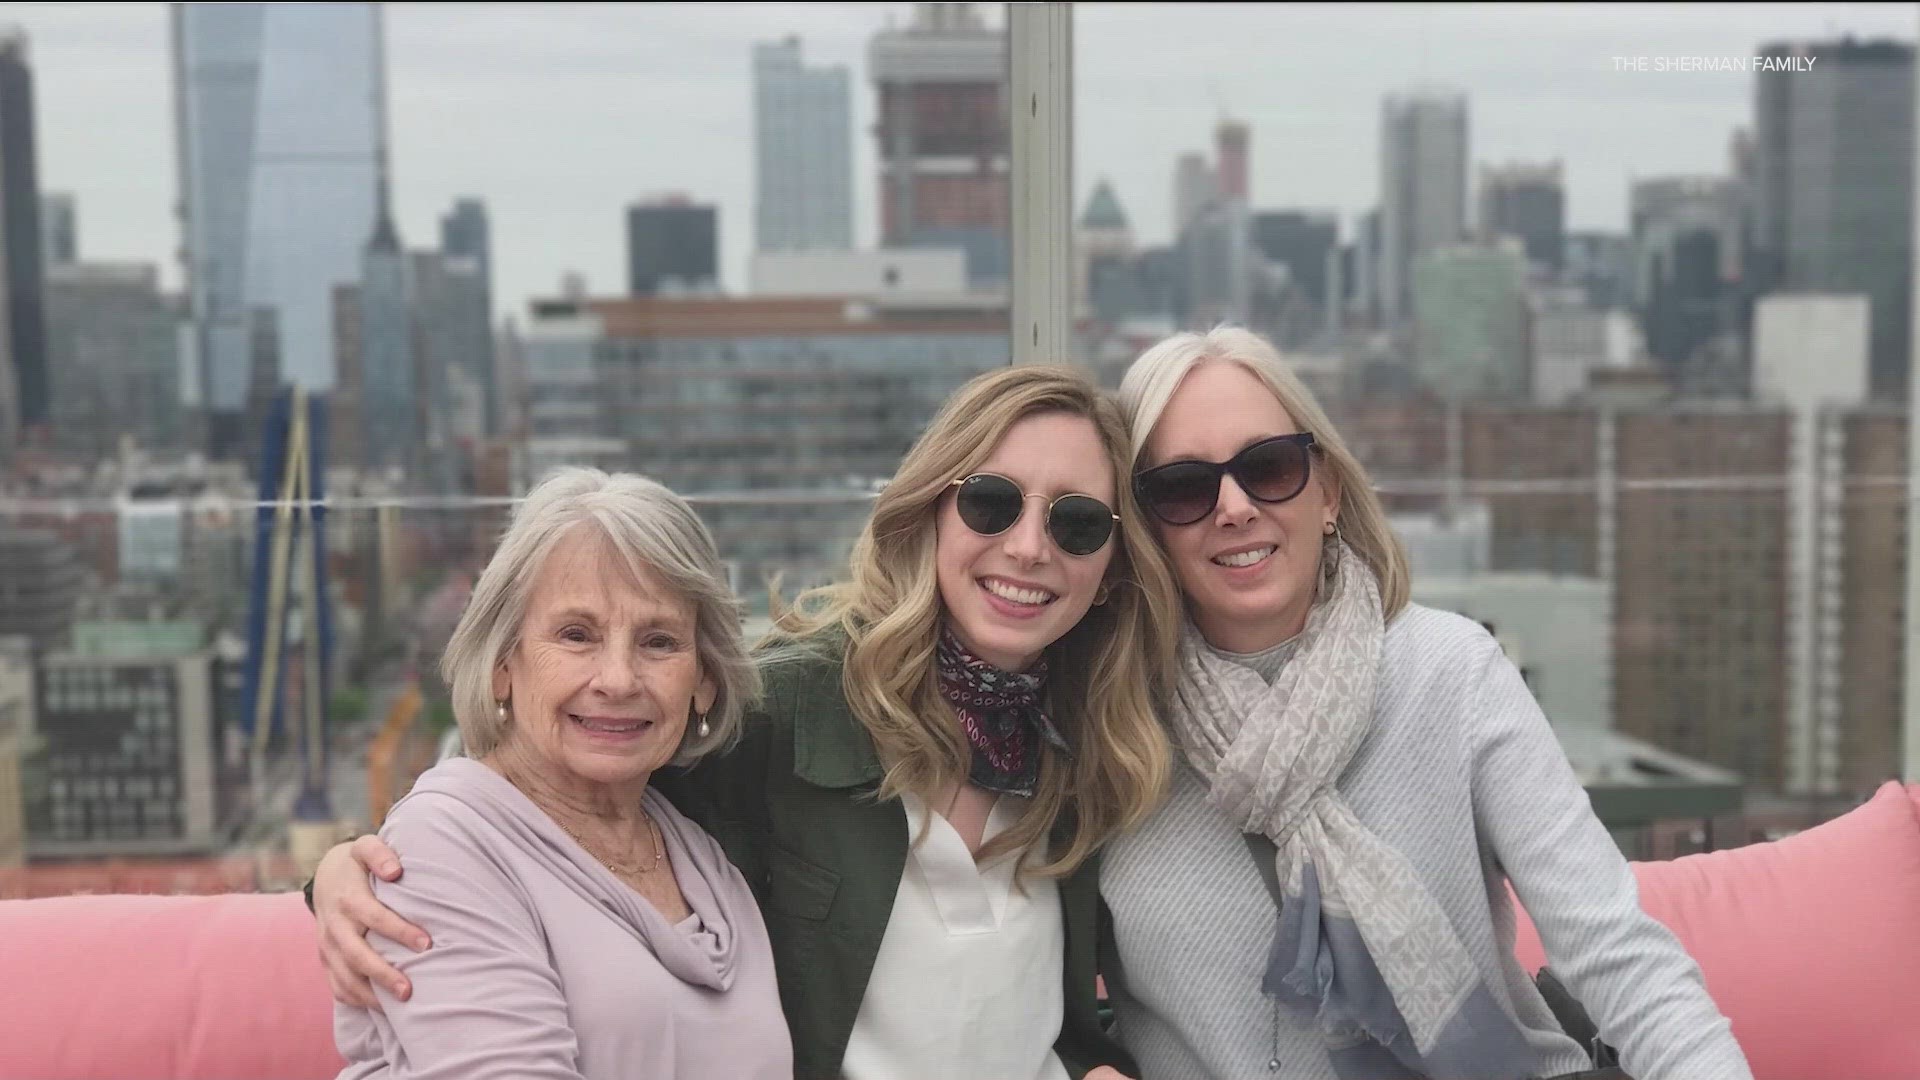 October is Breast Cancer Awareness Month. These three women – a grandmother, a mother and a daughter – all have their own experiences battling the cancer.